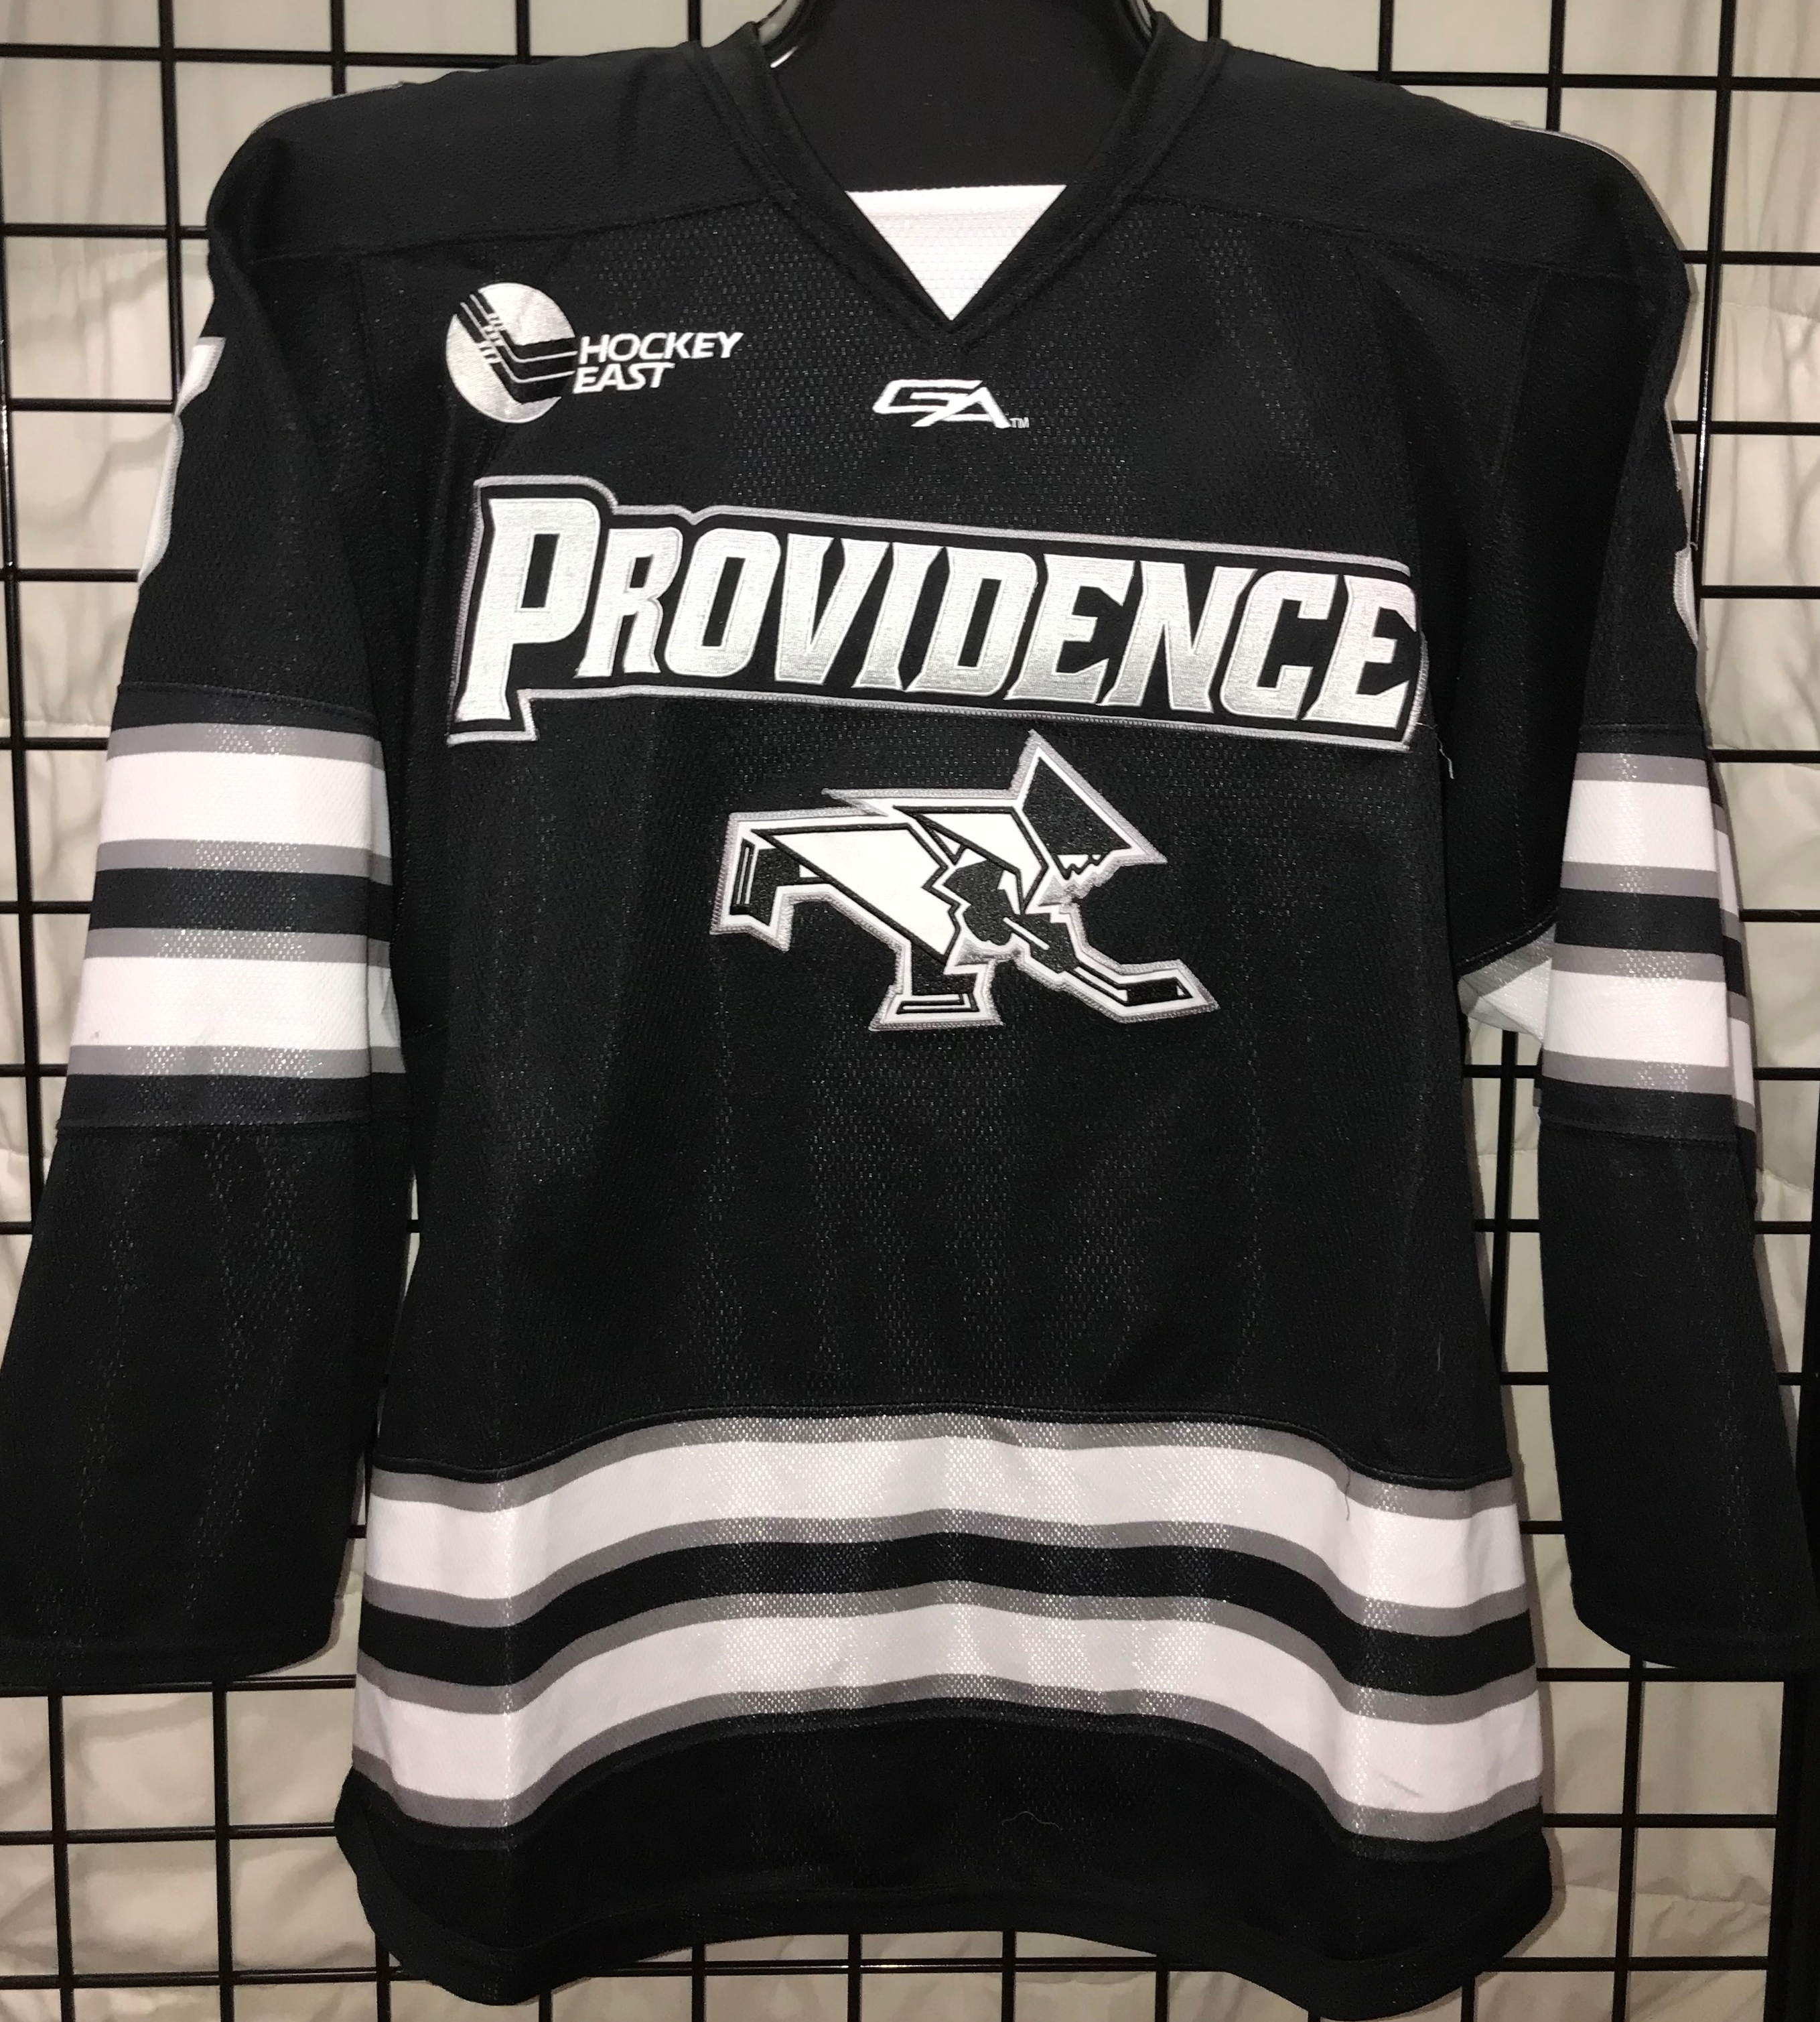 college hockey jerseys for sale